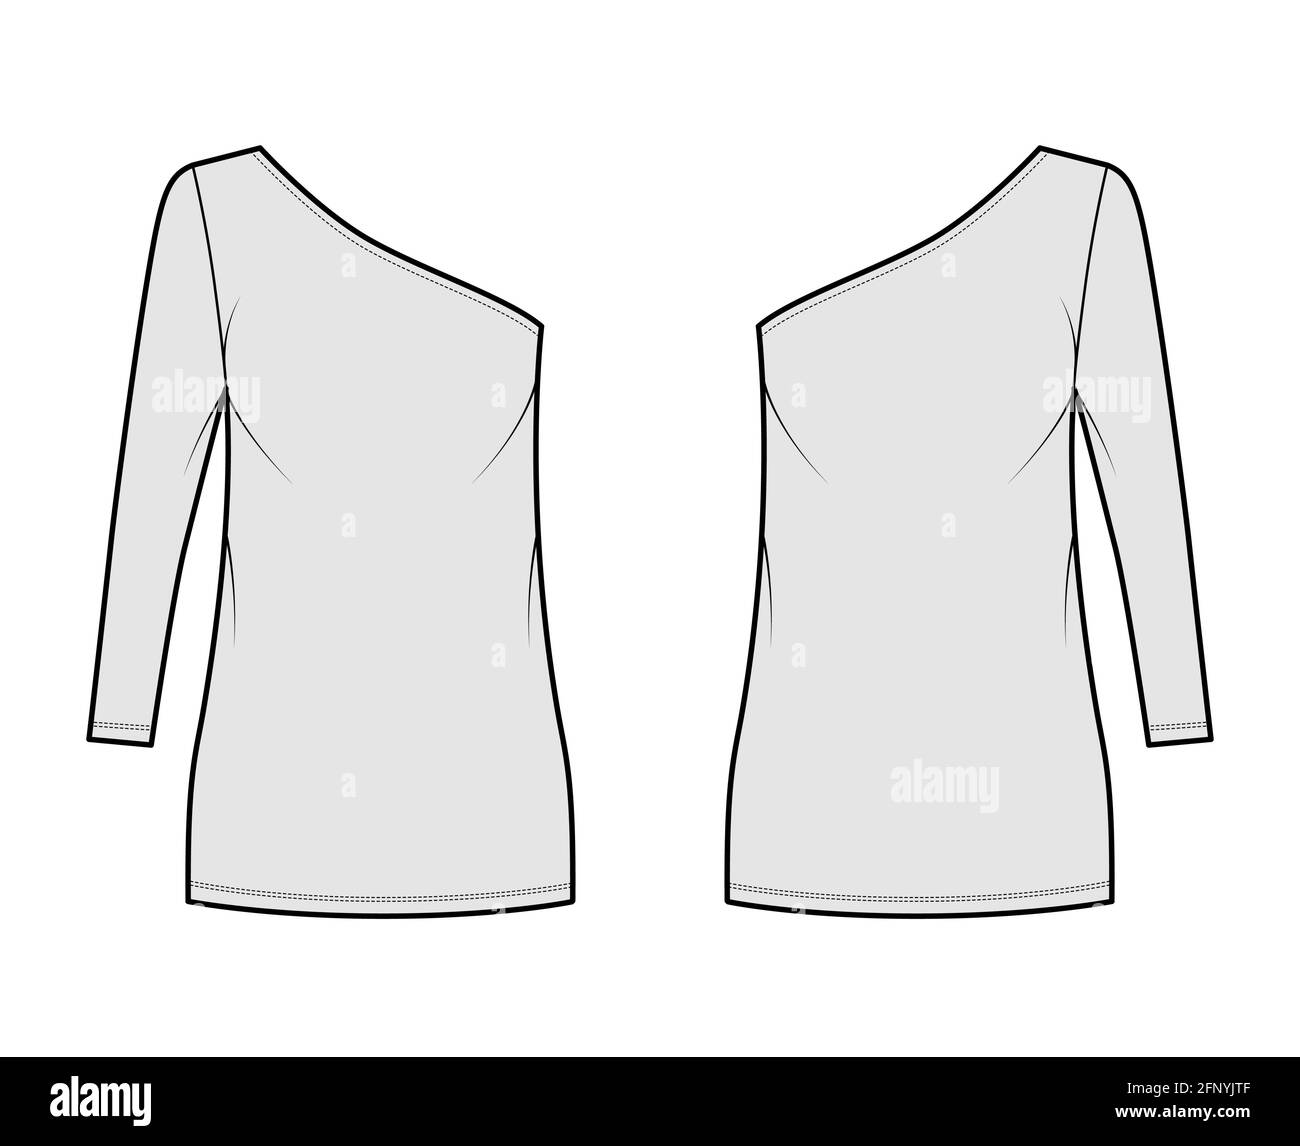 Dress one shoulder technical fashion illustration with long sleeve, oversized body, mini length pencil skirt. Flat apparel front, back, grey color style. Women, men unisex CAD mockup Stock Vector